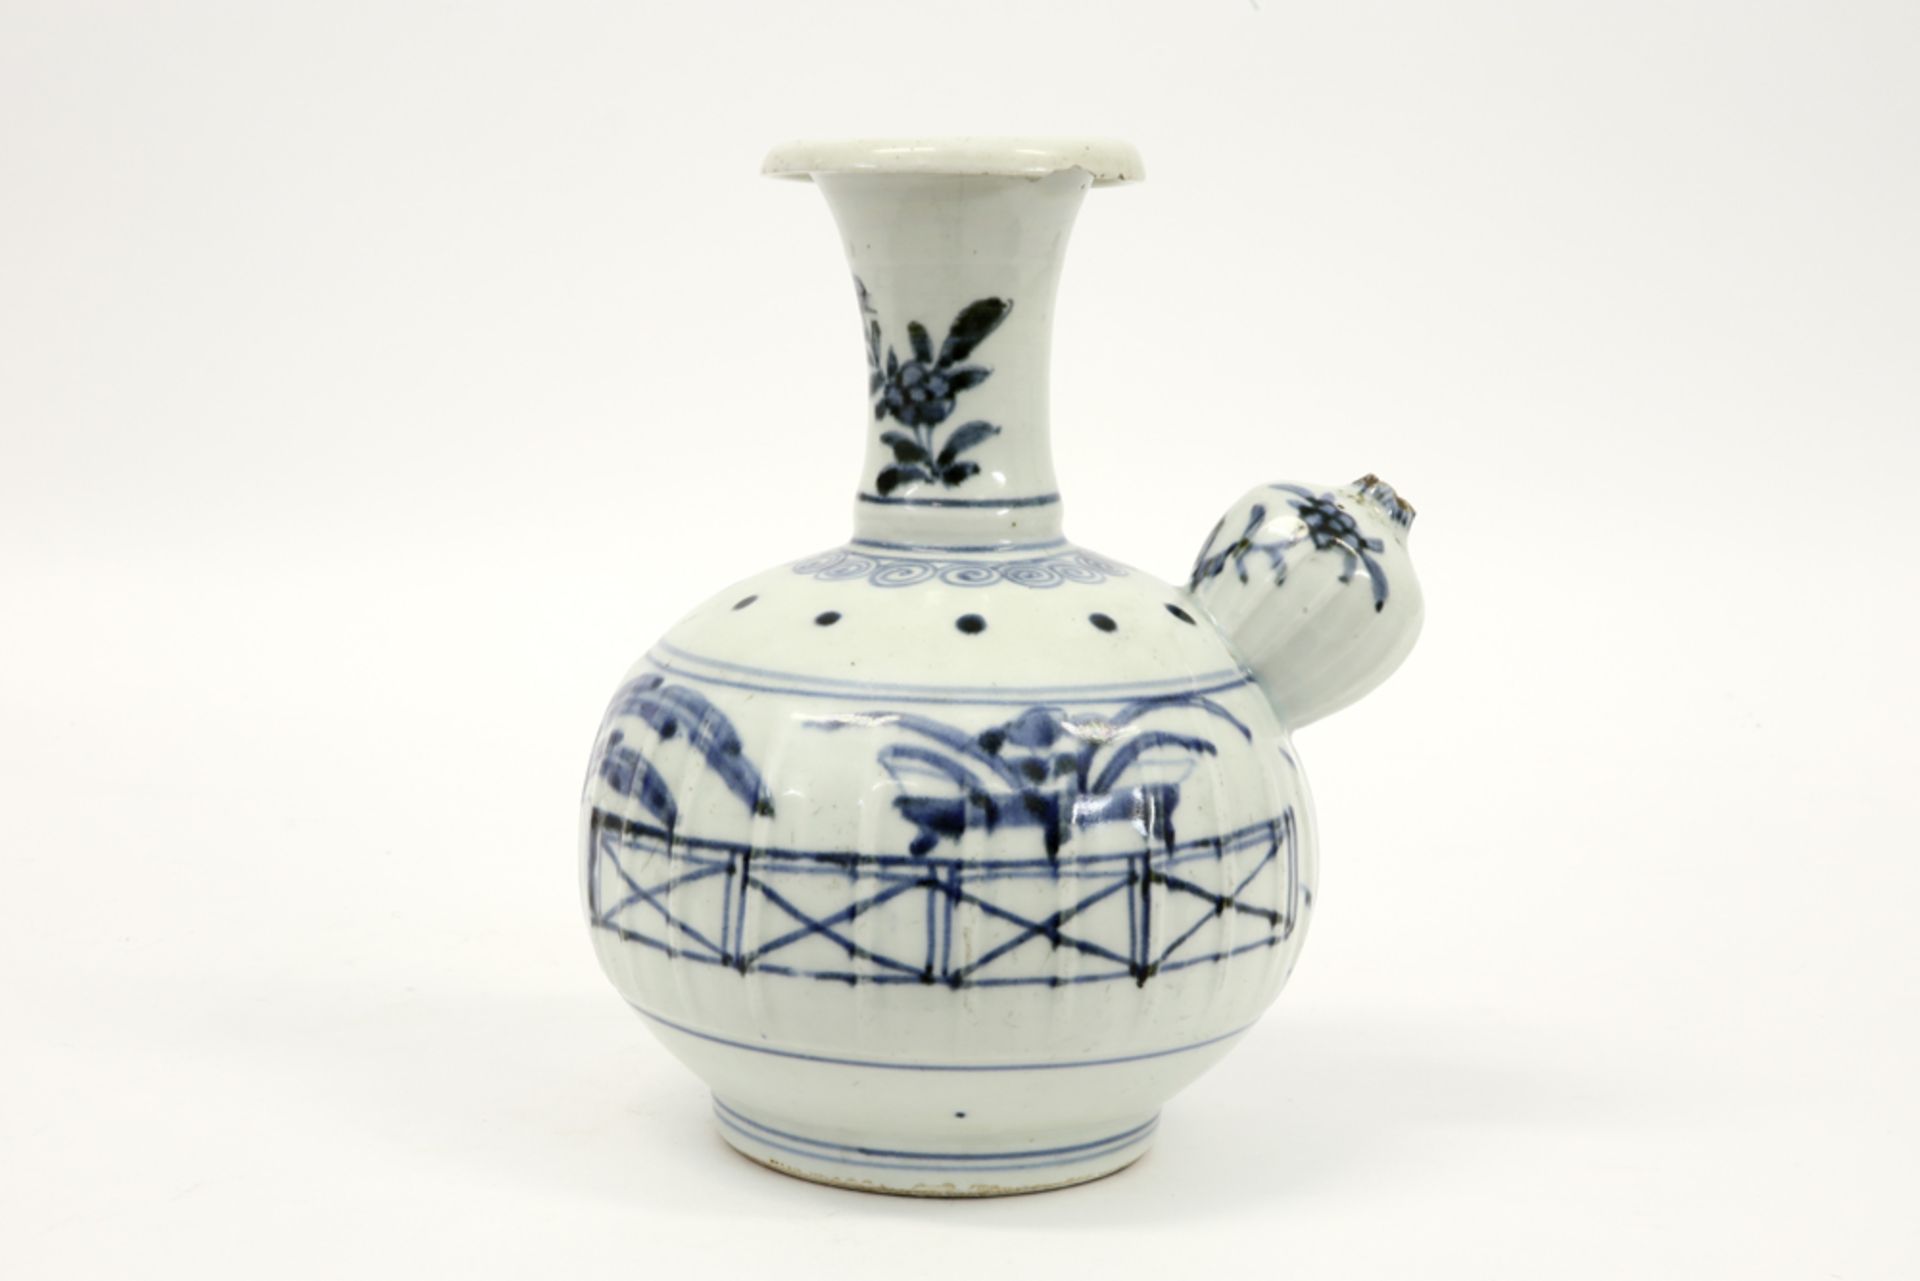 Chinese kendi in porcelain with a blue-white decor || Chinese zgn "kendi" met typische vorm in